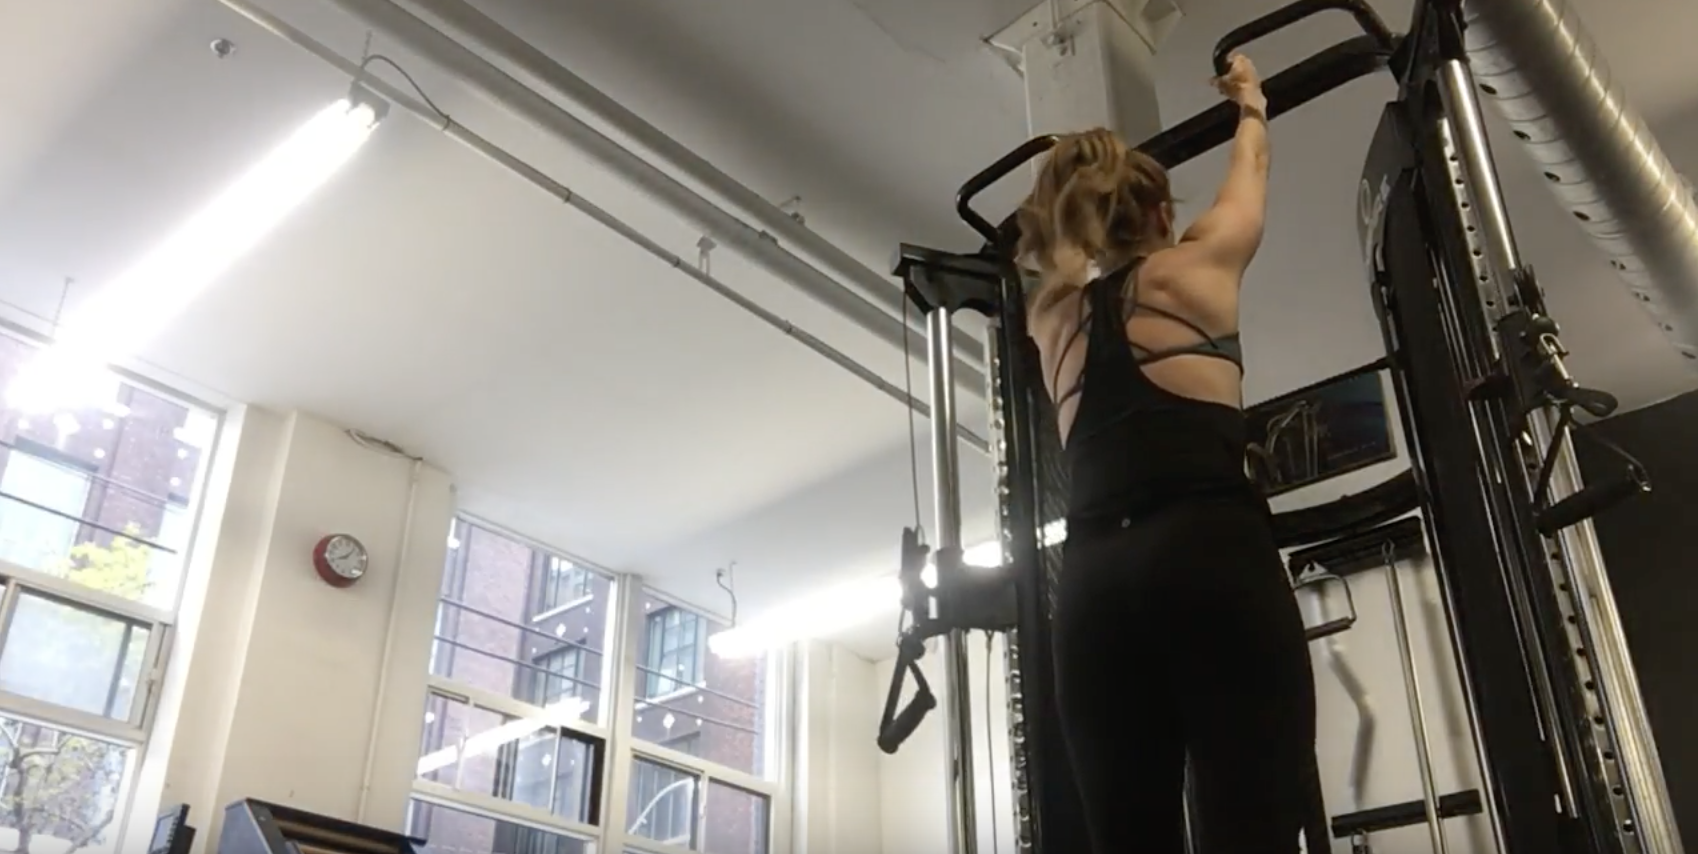 Go from dead weight to pull-up machine (variations)